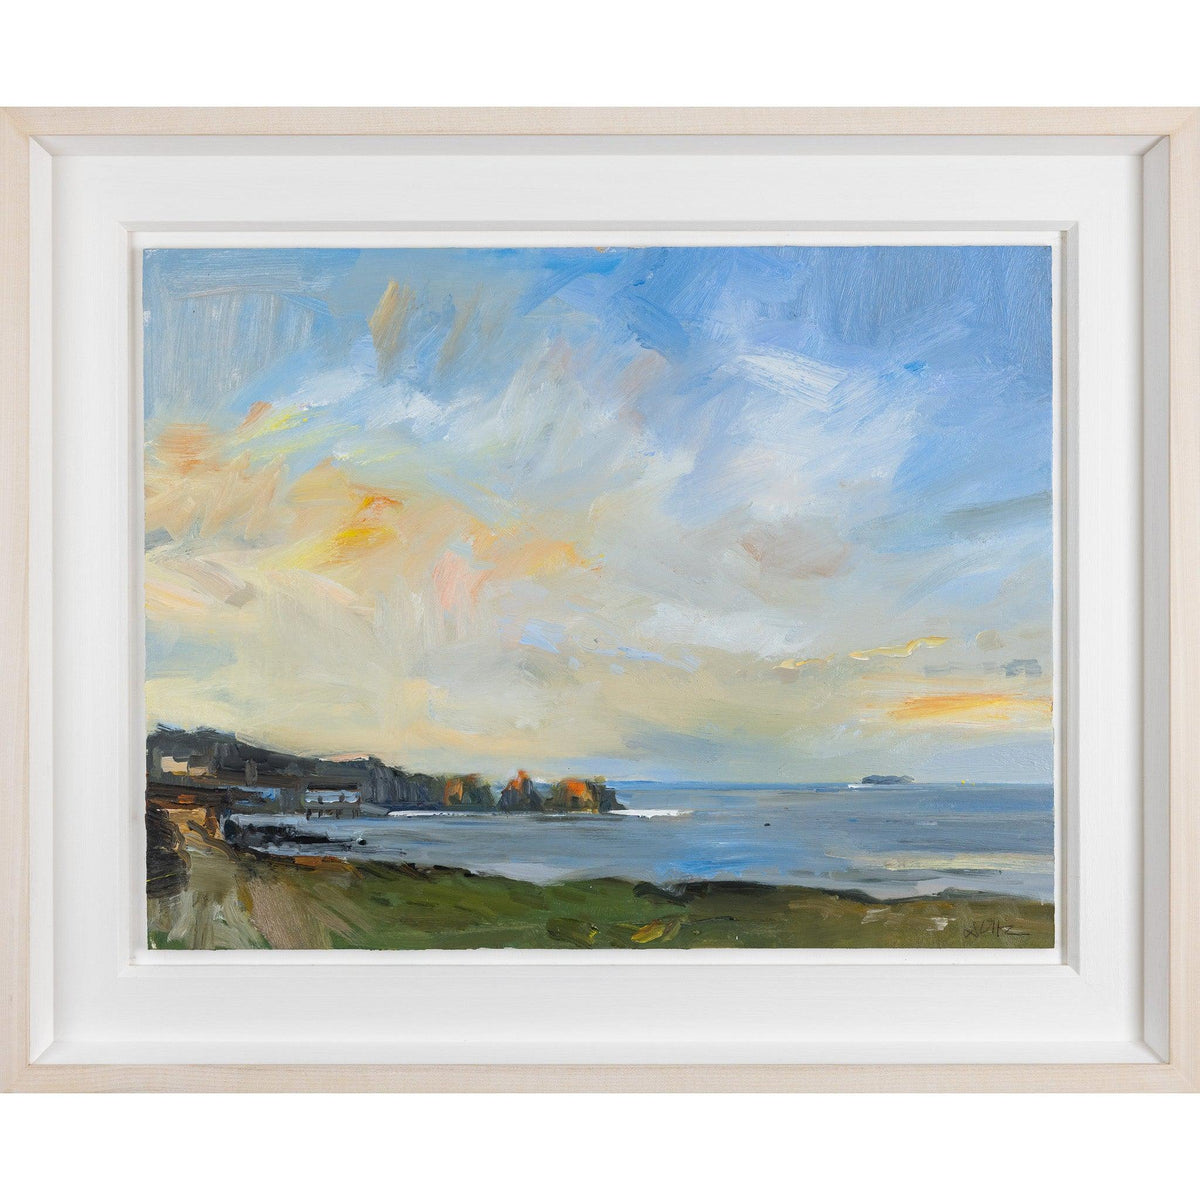 &#39;Sunset, Mother Ivey&#39;s Bay&#39; oil on board original by David Atkins, available at Padstow Gallery, Cornwall